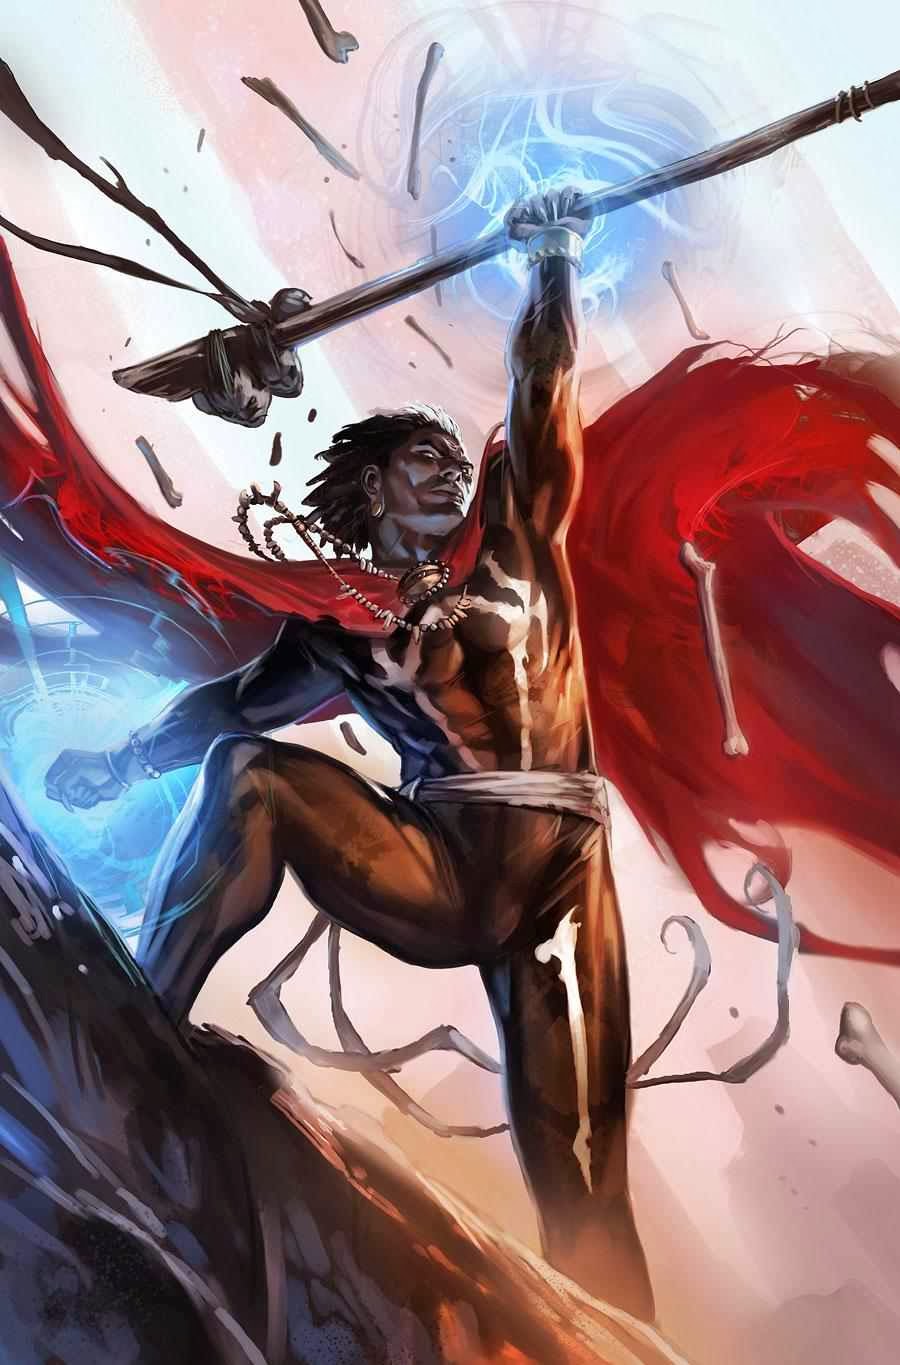 Read more about the article Notes On A Comic Book – Doctor Voodoo: Avenger Of The Supernatural